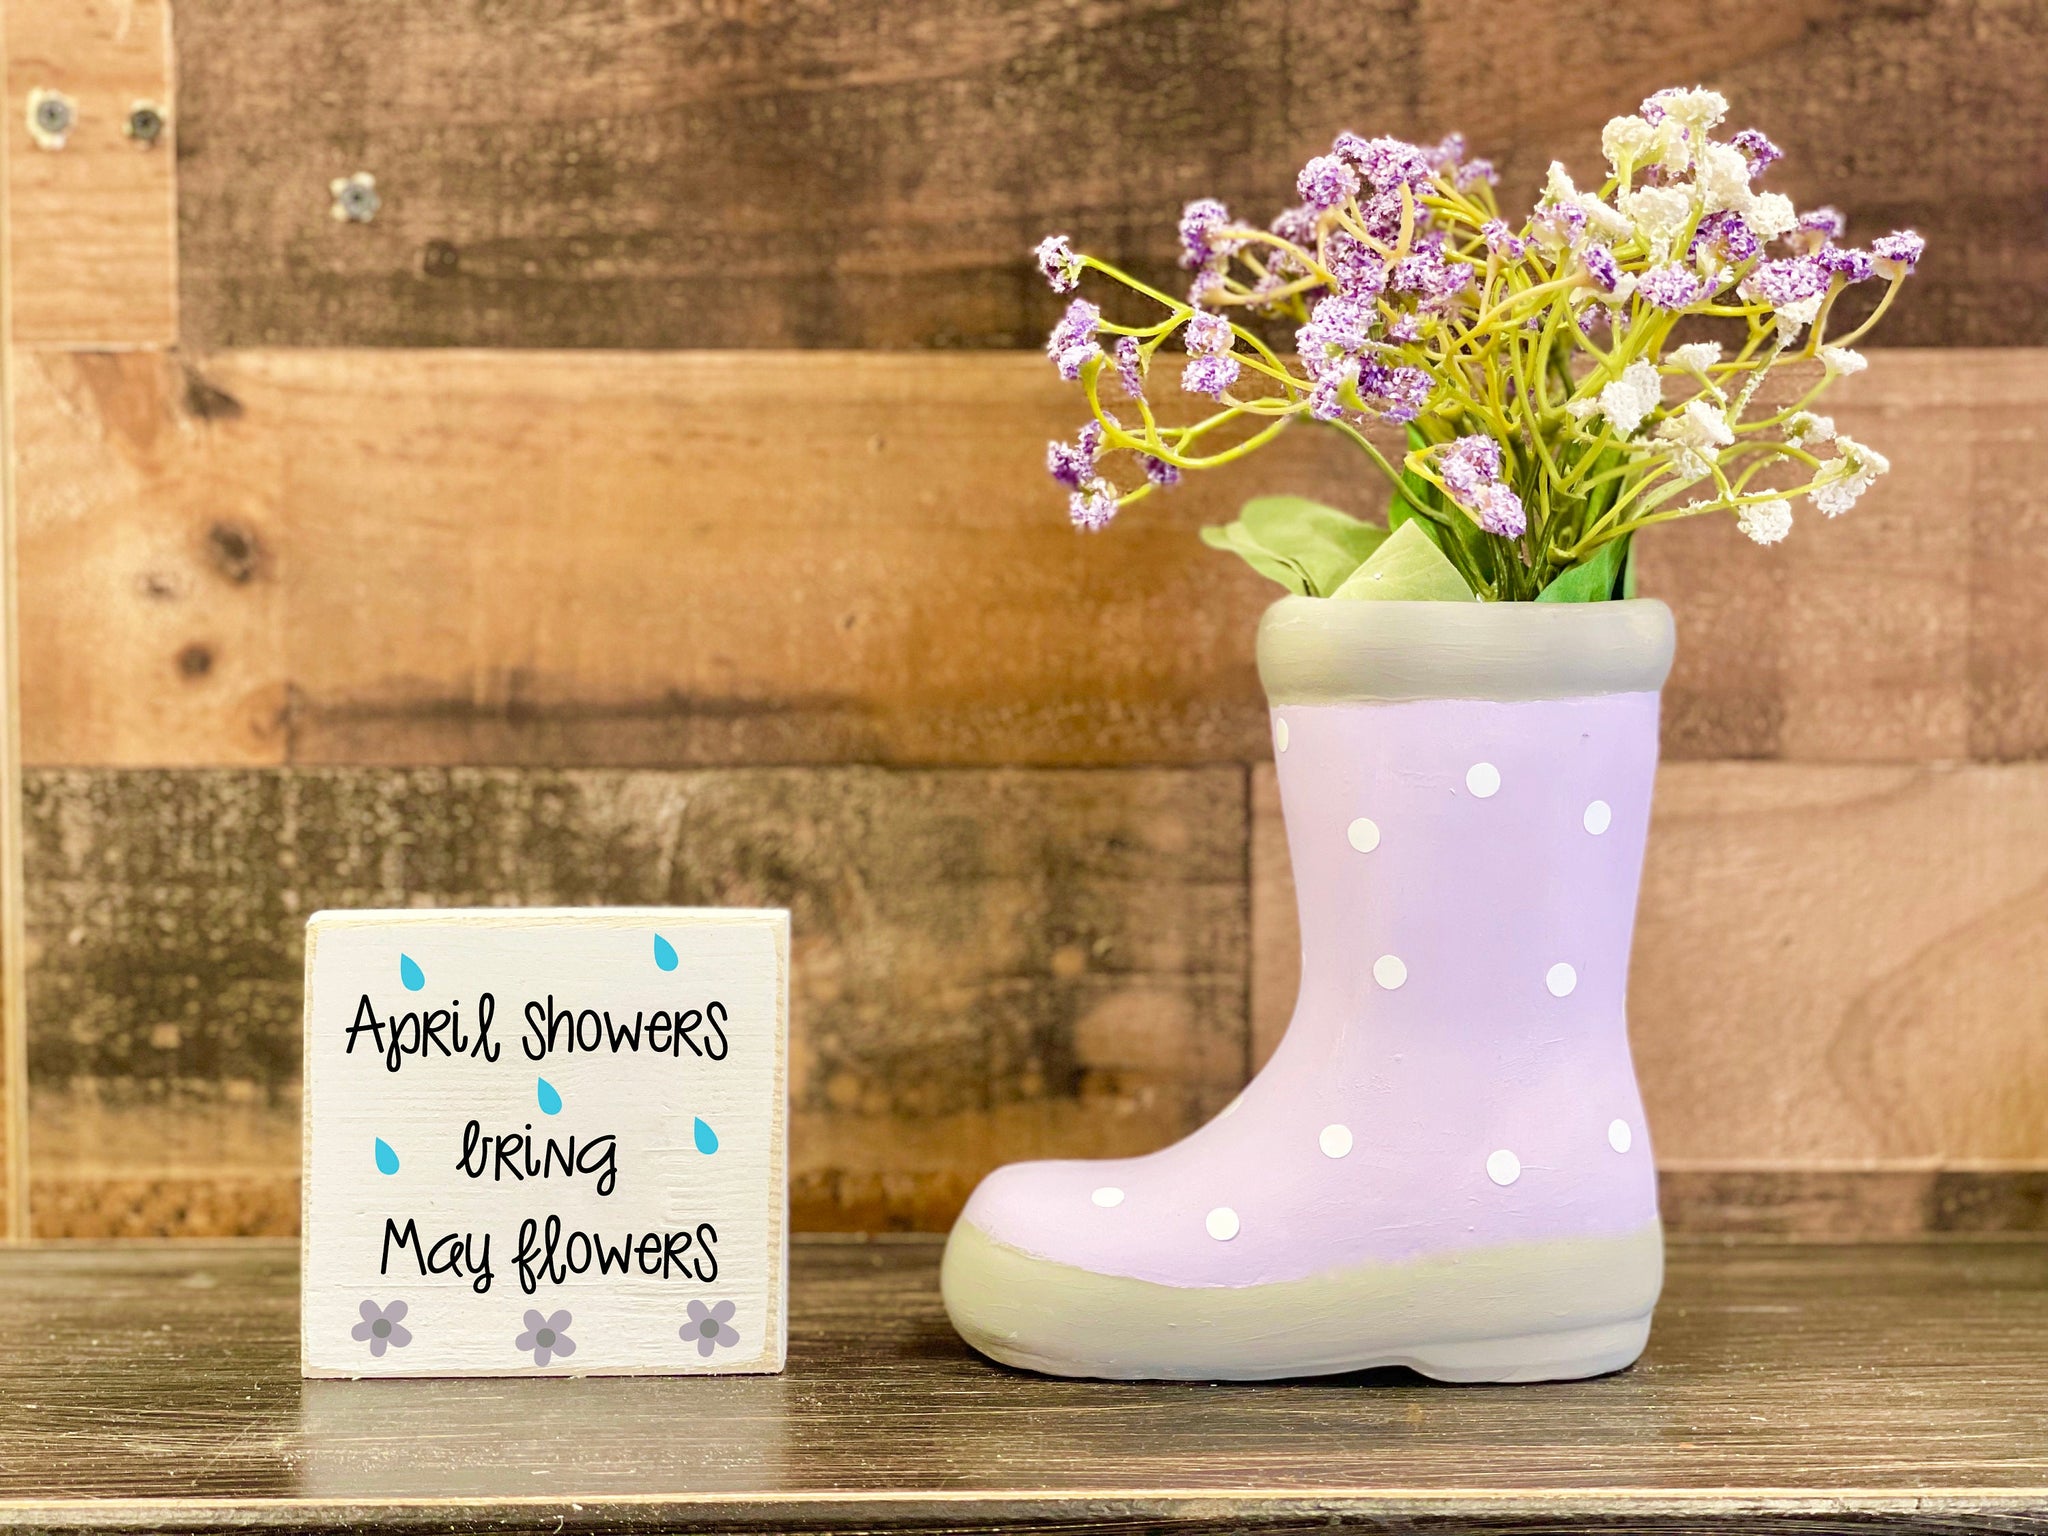 Ceramic rain boot planter, Spring decor, Flower vase, Mother's day gift, Tiered tray decor